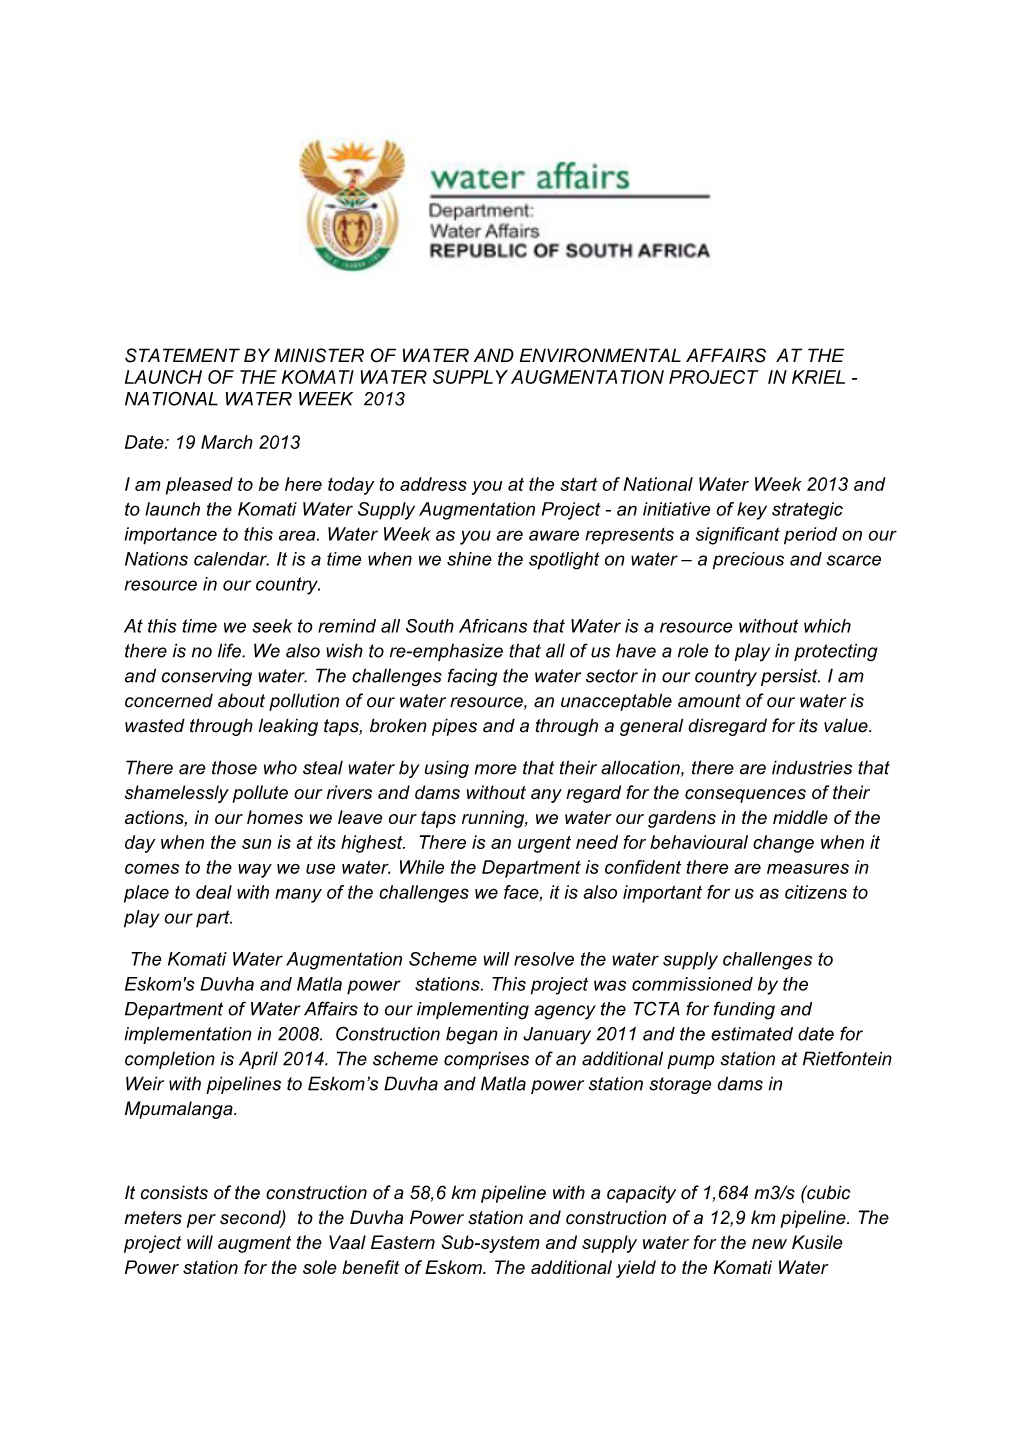 Statement by Minister of Water and Environmental Affairs at the Launch of the Komati Water Supply Augmentation Project in Kriel - National Water Week 2013